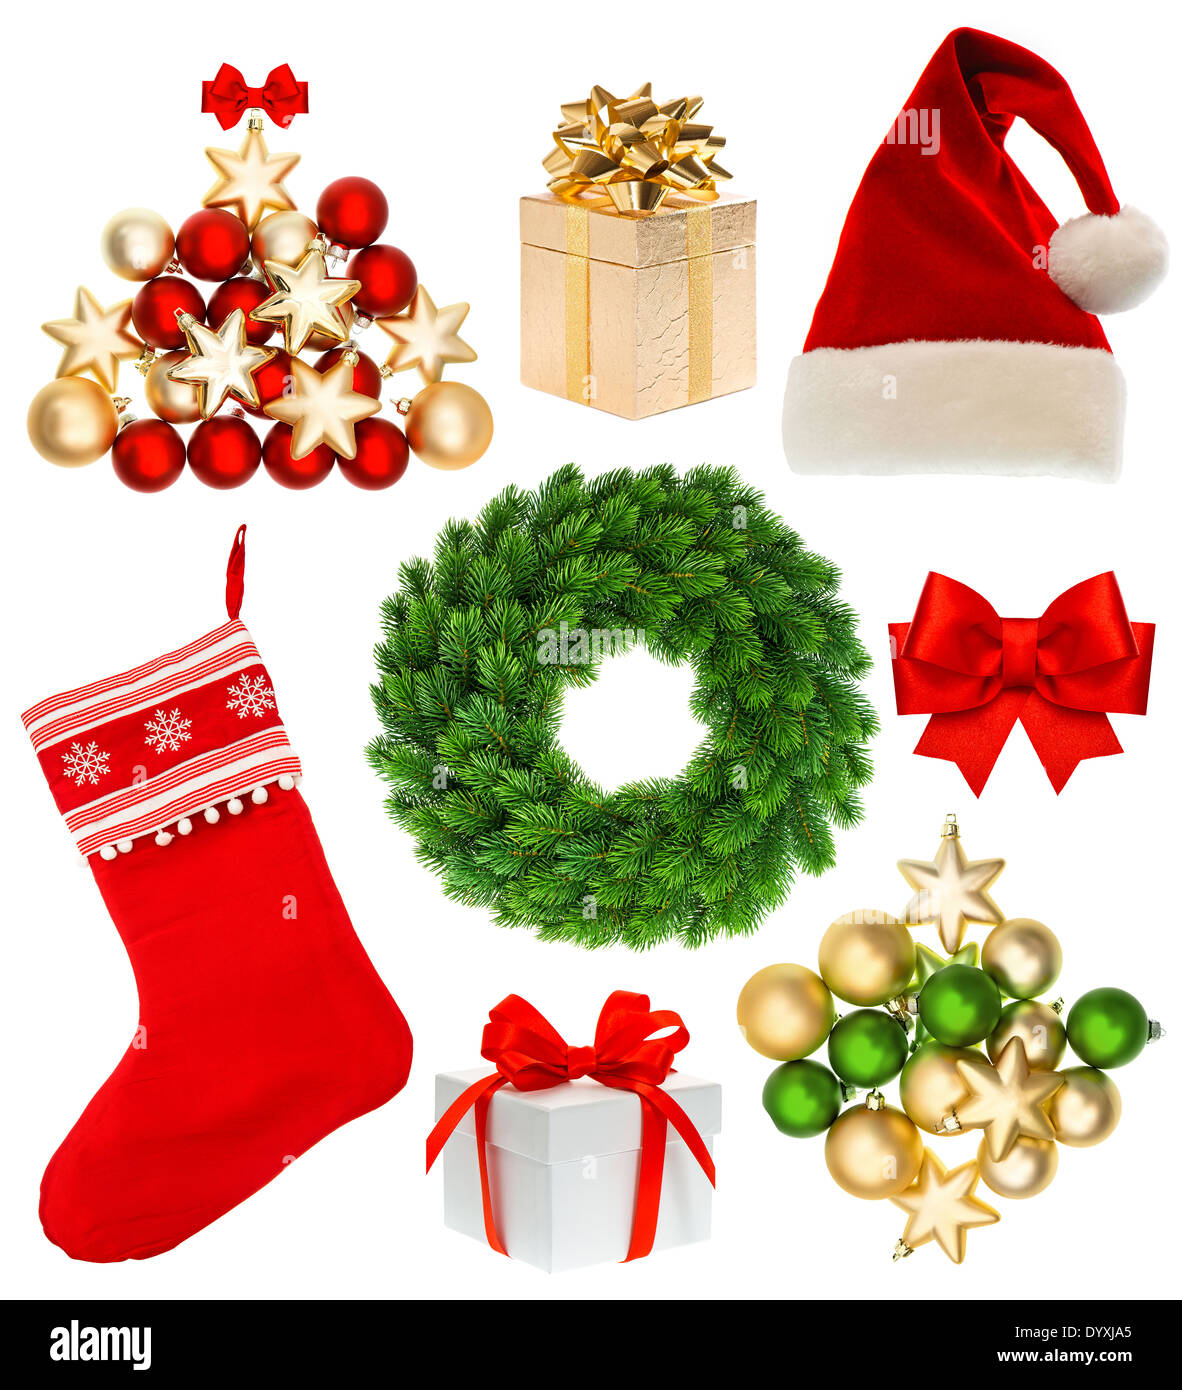 Christmas collection isolated on white background. Set with stocking, gifts, wreath, sock, hat, sled, baubles, ribbon bow Stock Photo